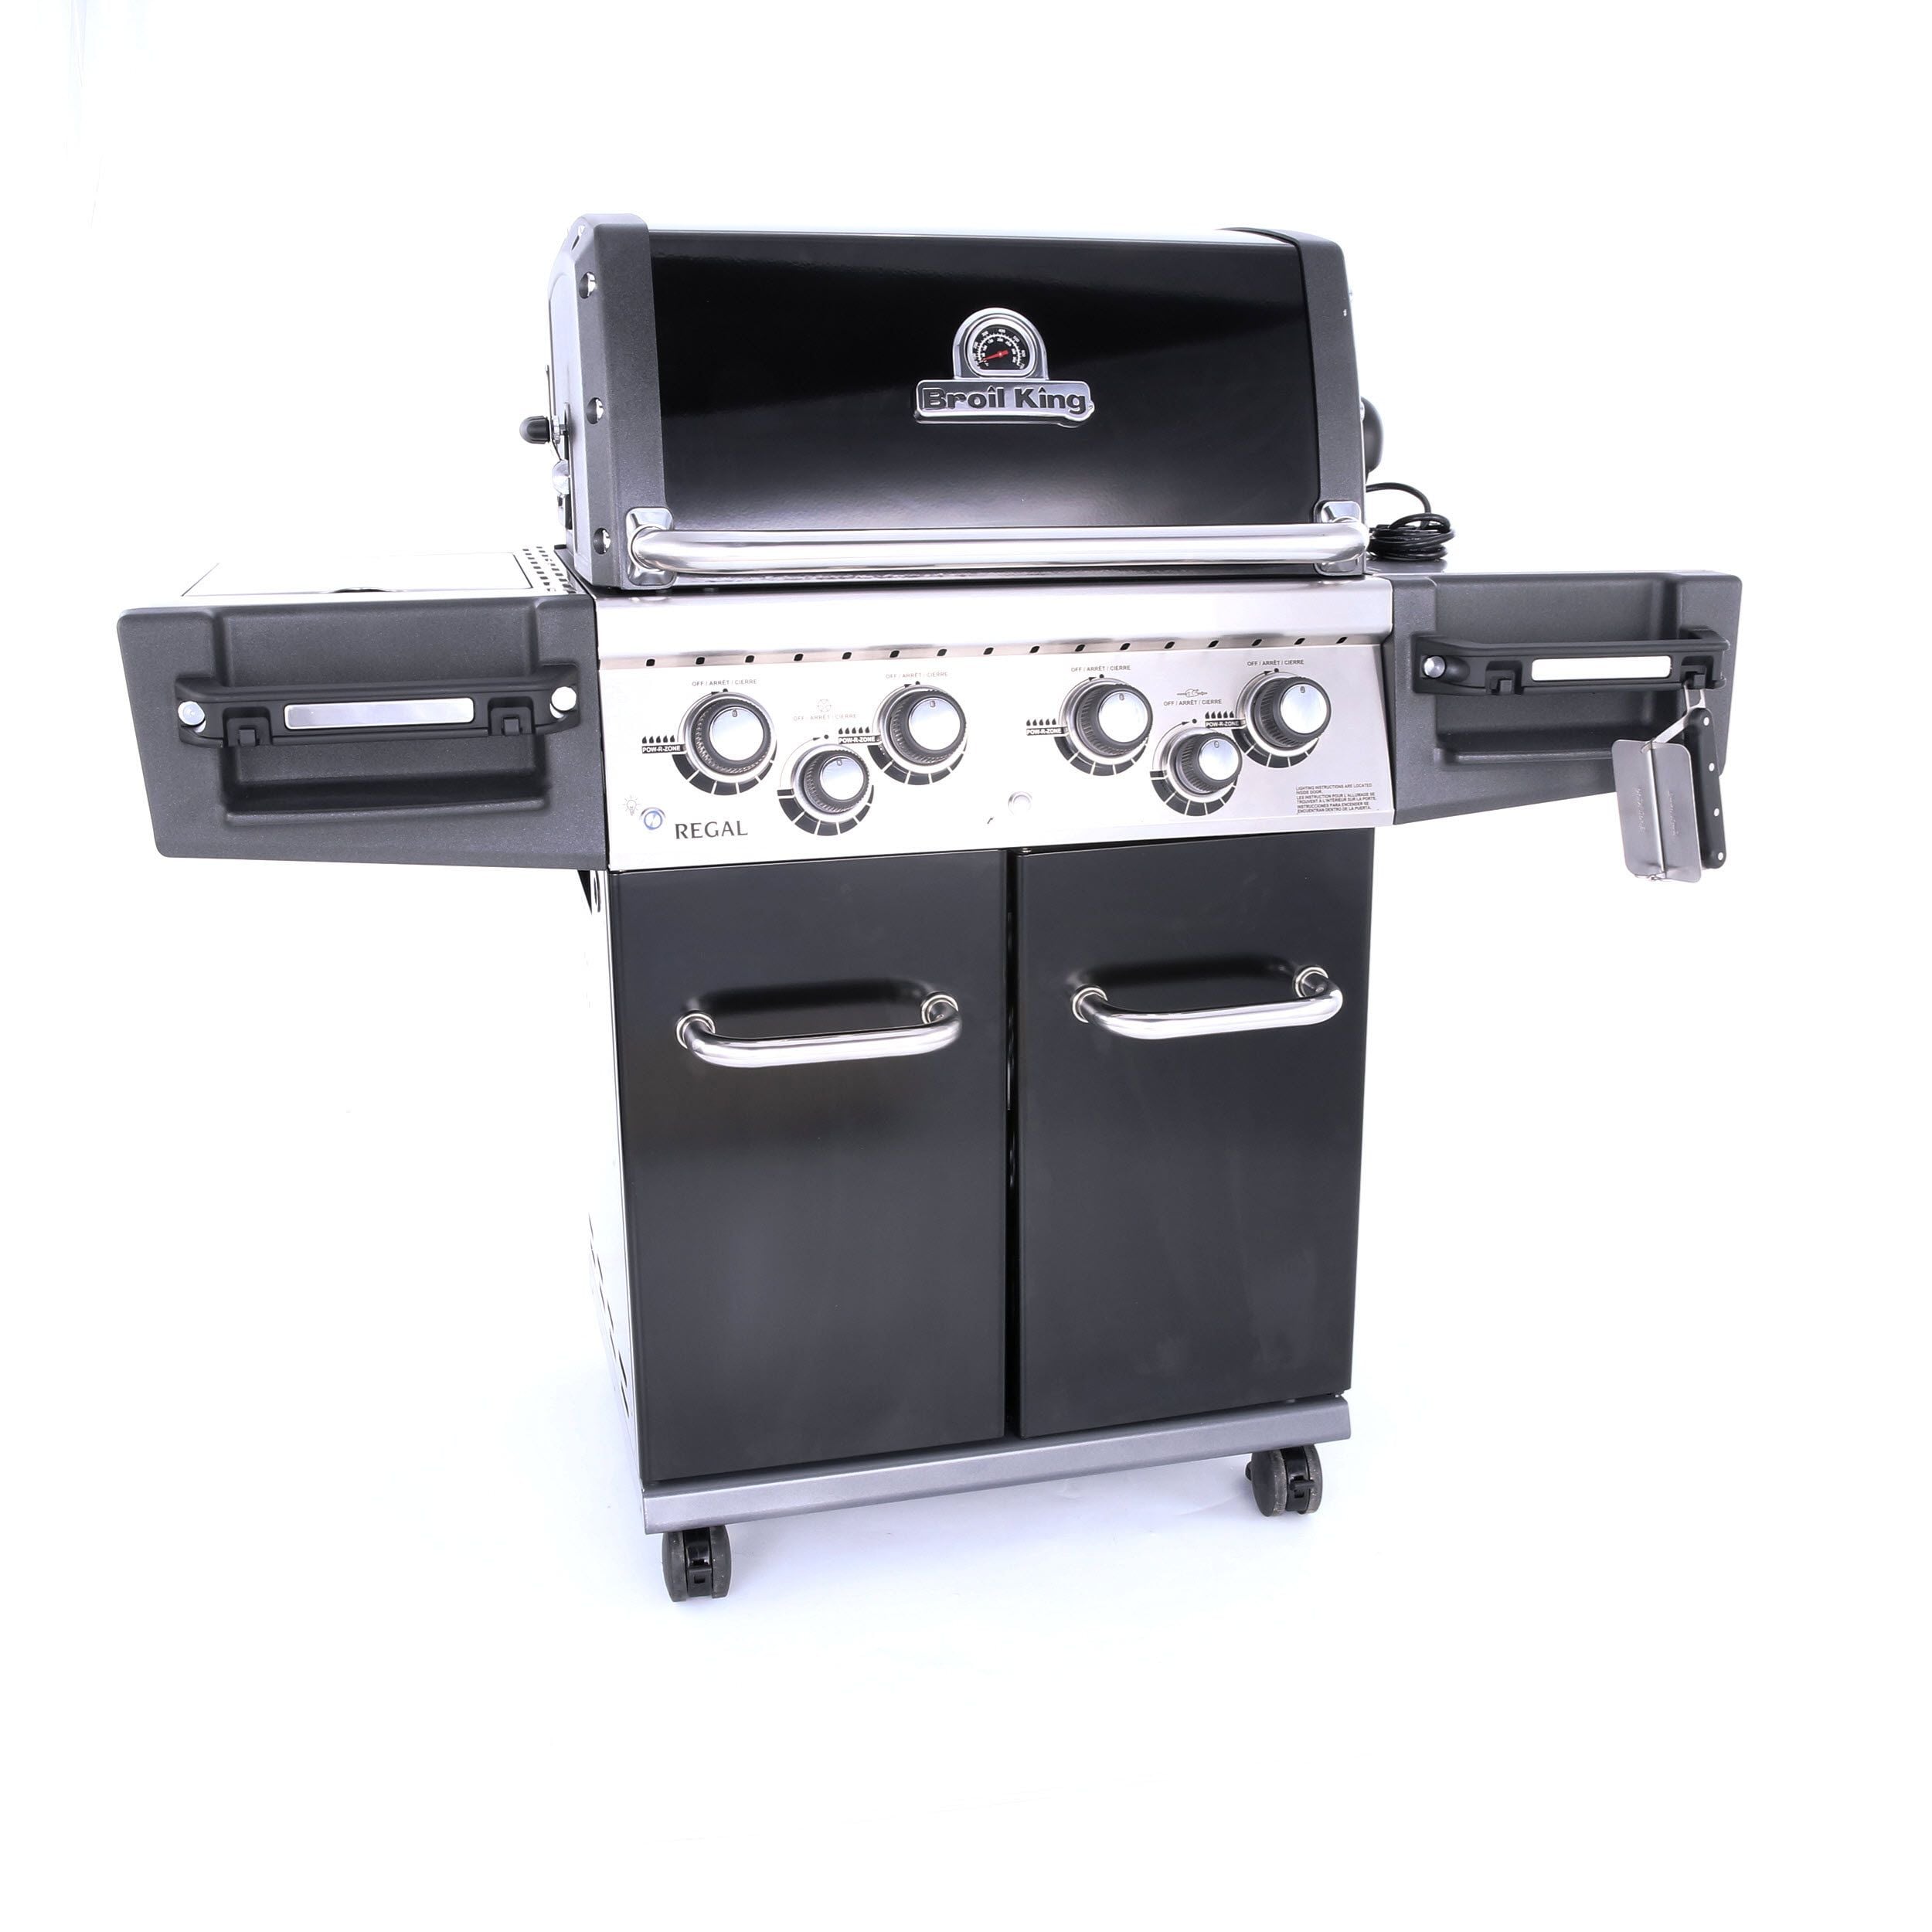 Broil King Regal 490 Black 4 Burner Liquid Propane Gas Grill With 1 Side Burner With Rotisserie Burner In The Gas Grills Department At Lowes Com